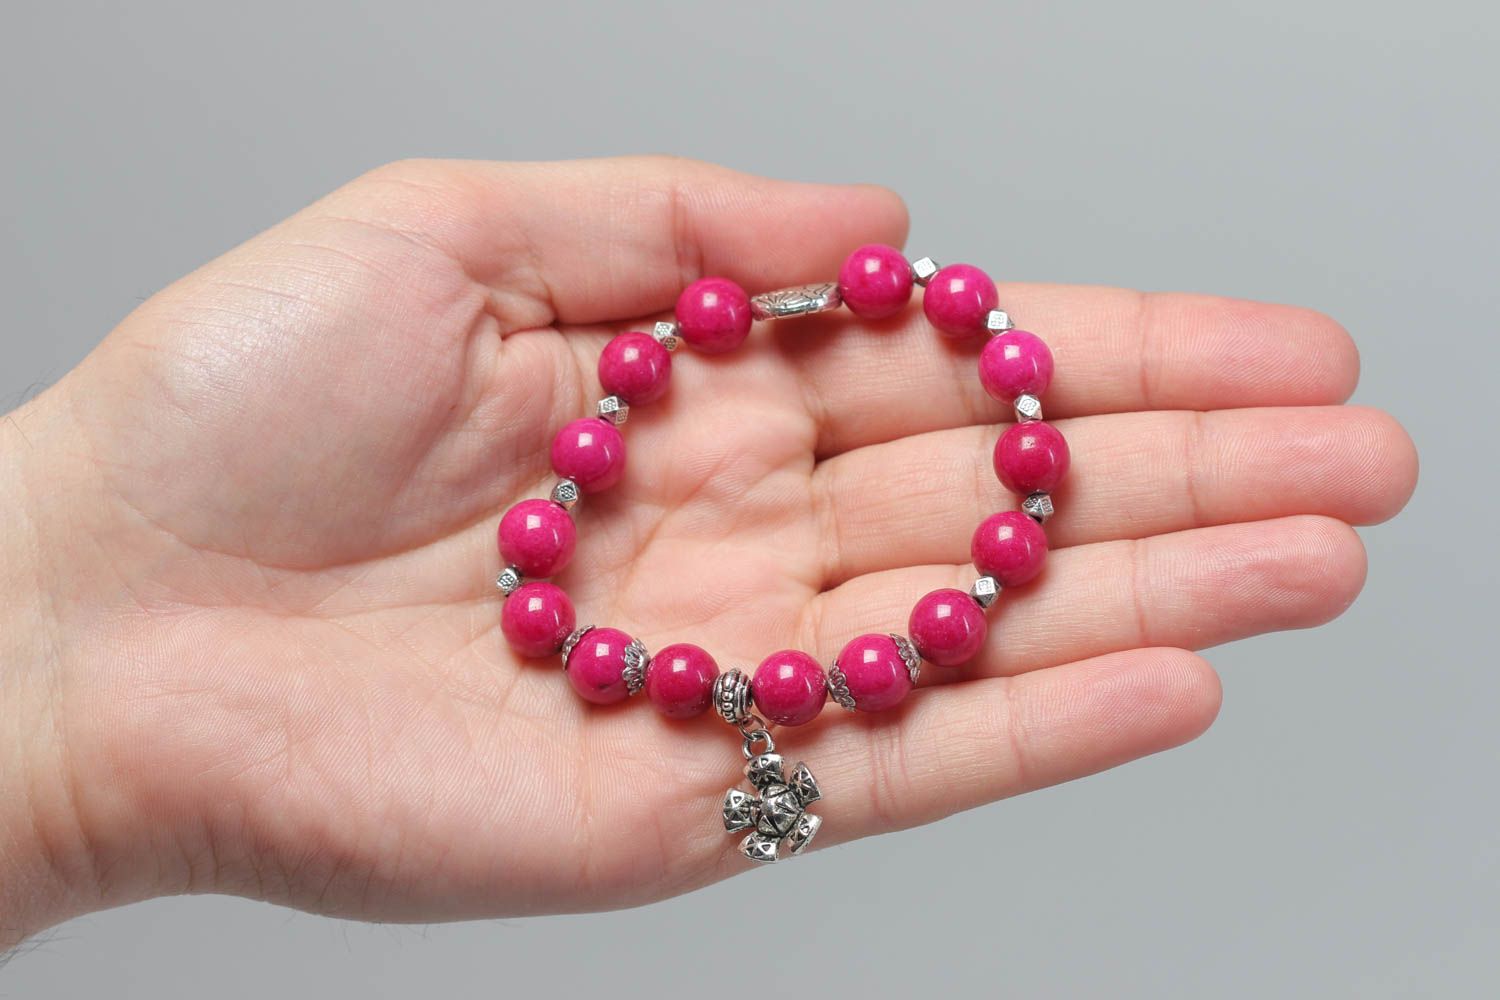 Handmade bracelet with charms stylish bright accessory cute pink jewelry photo 5